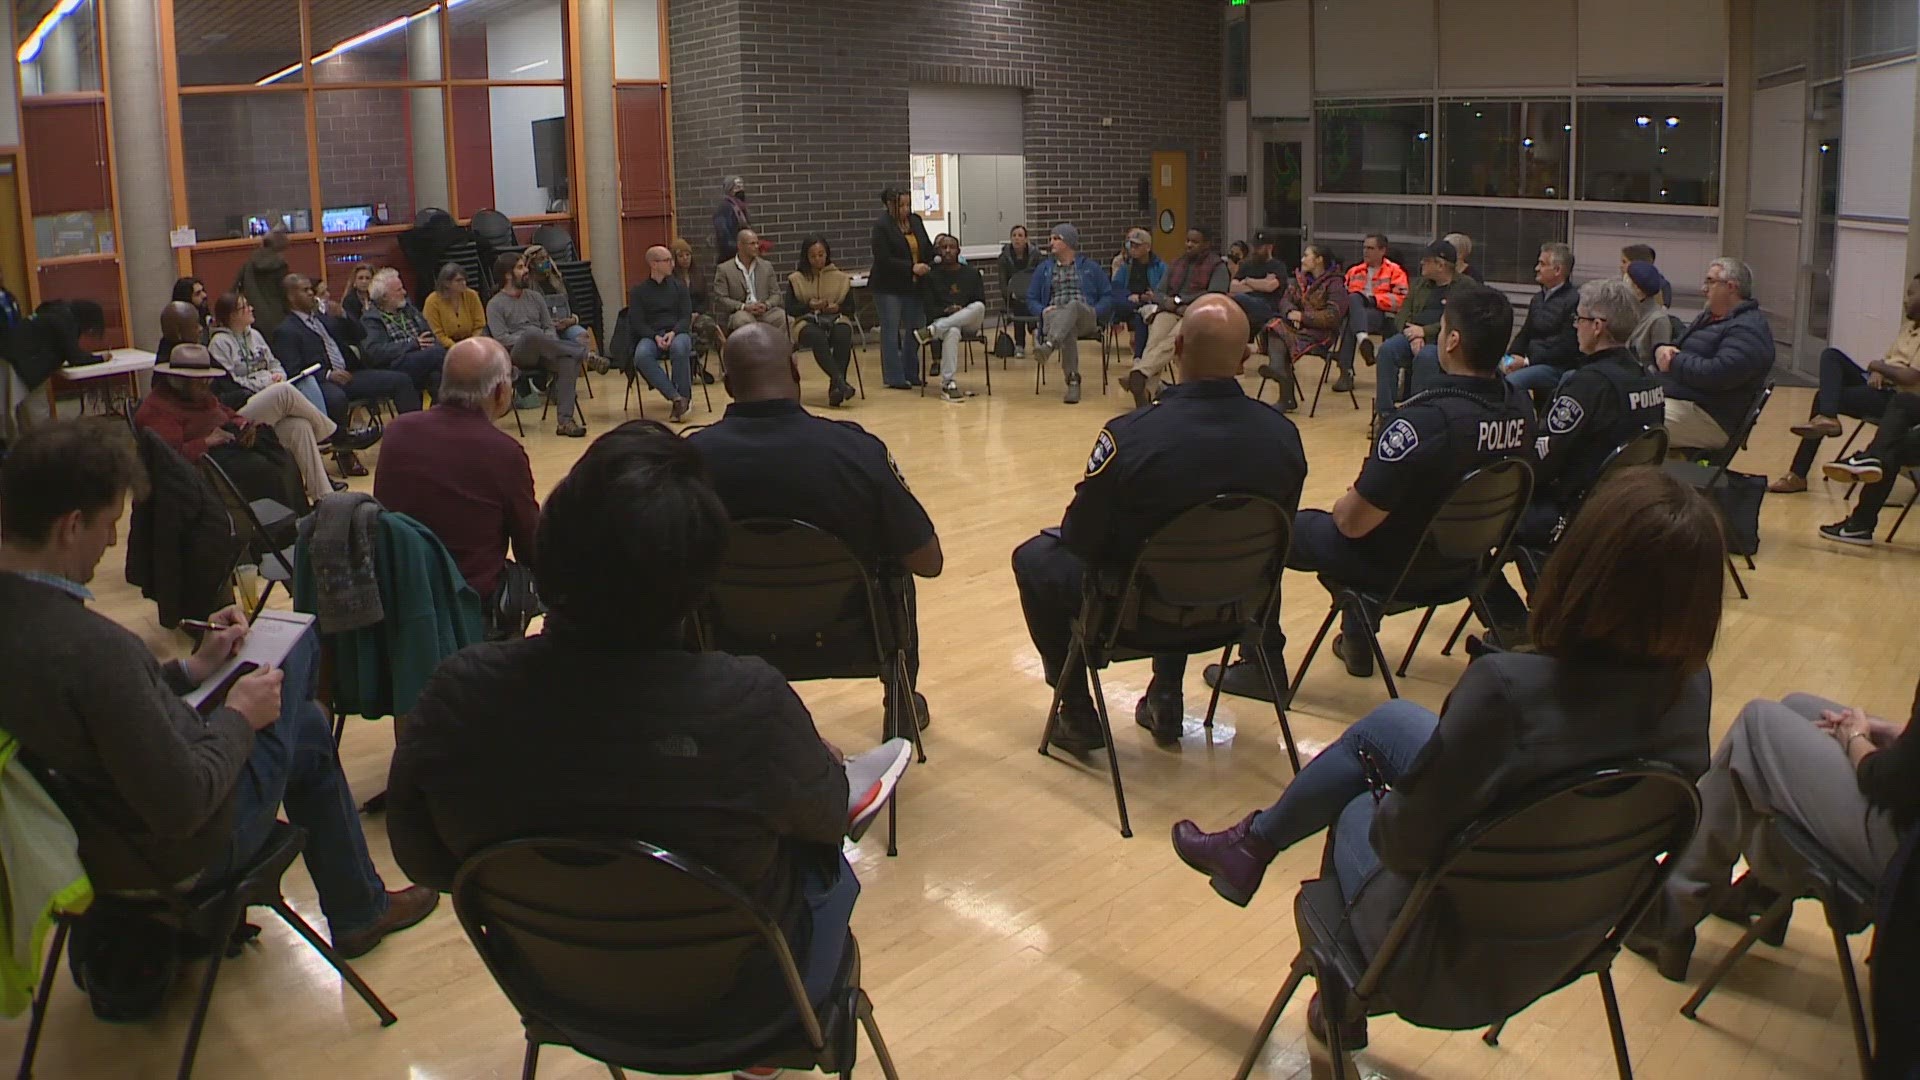 A meeting was held on Thursday to address safety concerns. This week, police responded to the Central District for reports of gunfire two nights in a row.